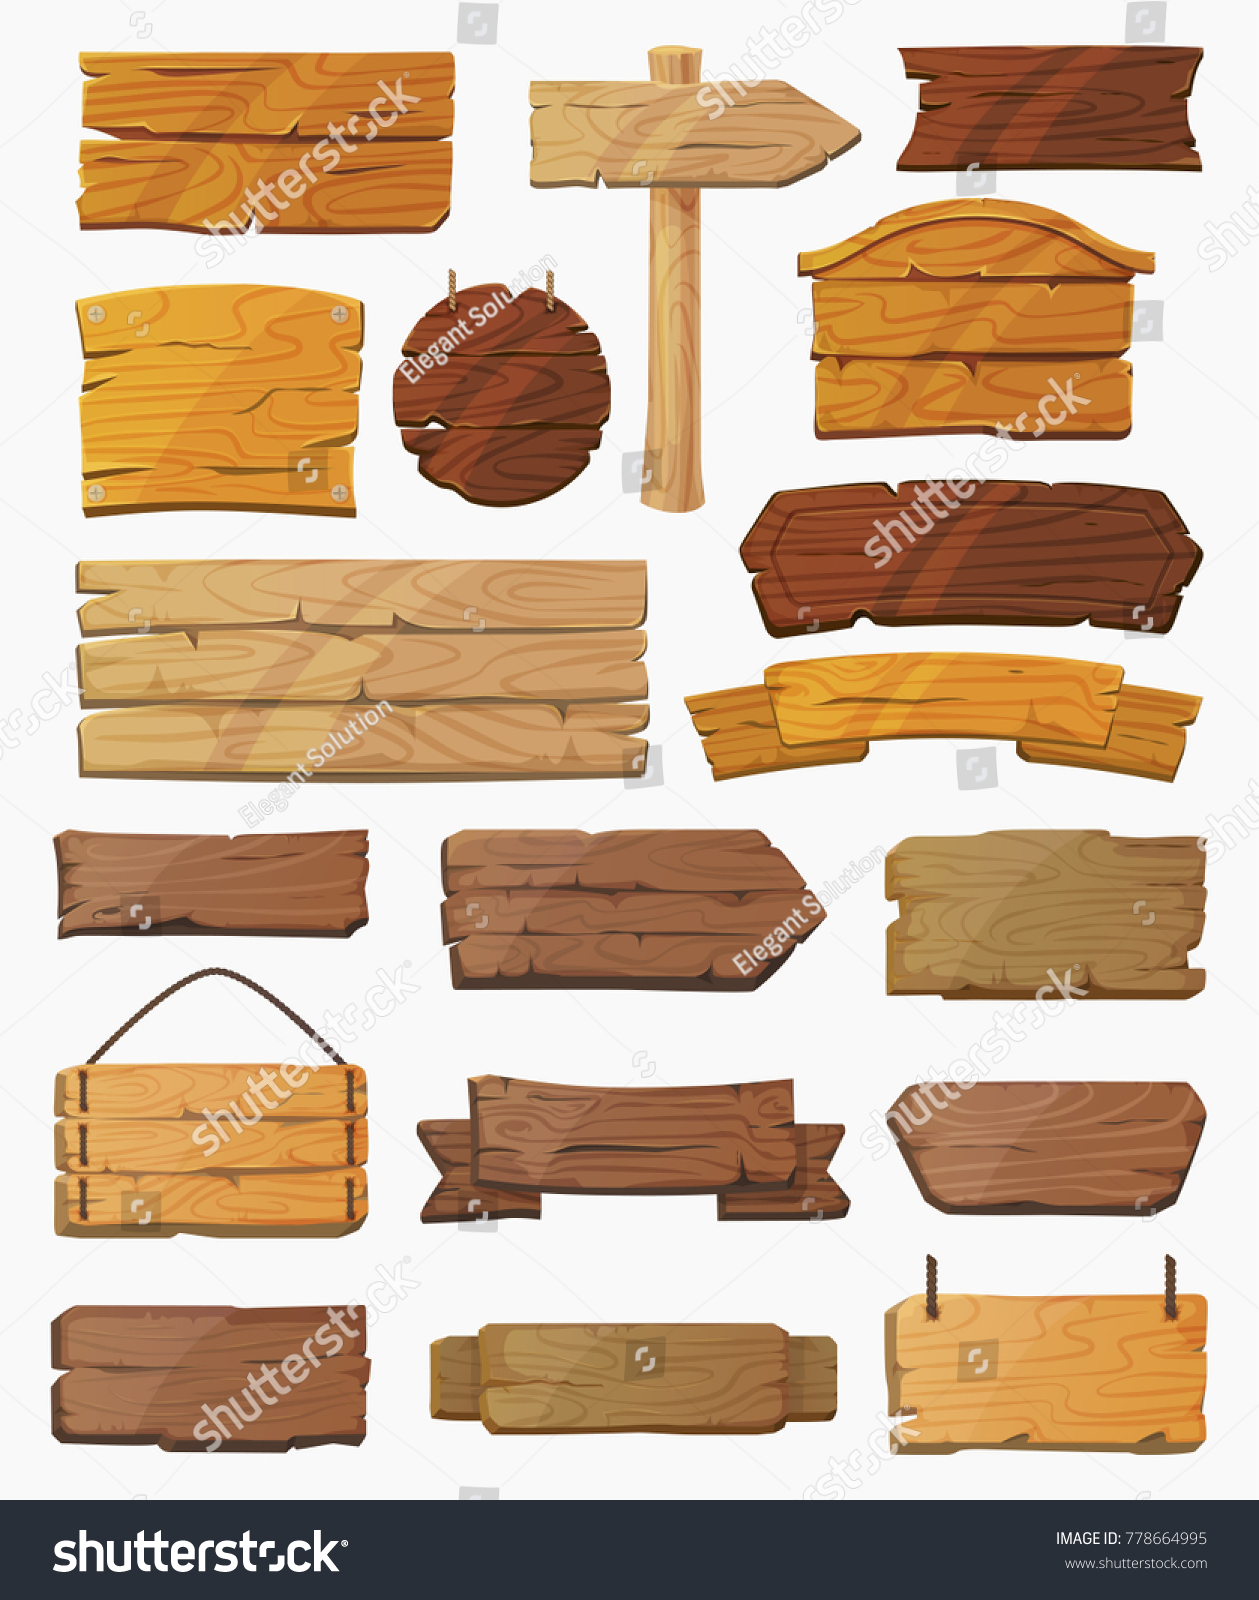 Blank or empty, clear isolated wooden planks or signboards. Set of vintage or old, retro banners with nails. Signs for messages or pointers with arrow for pathfinding. Signpost at desert, information #778664995